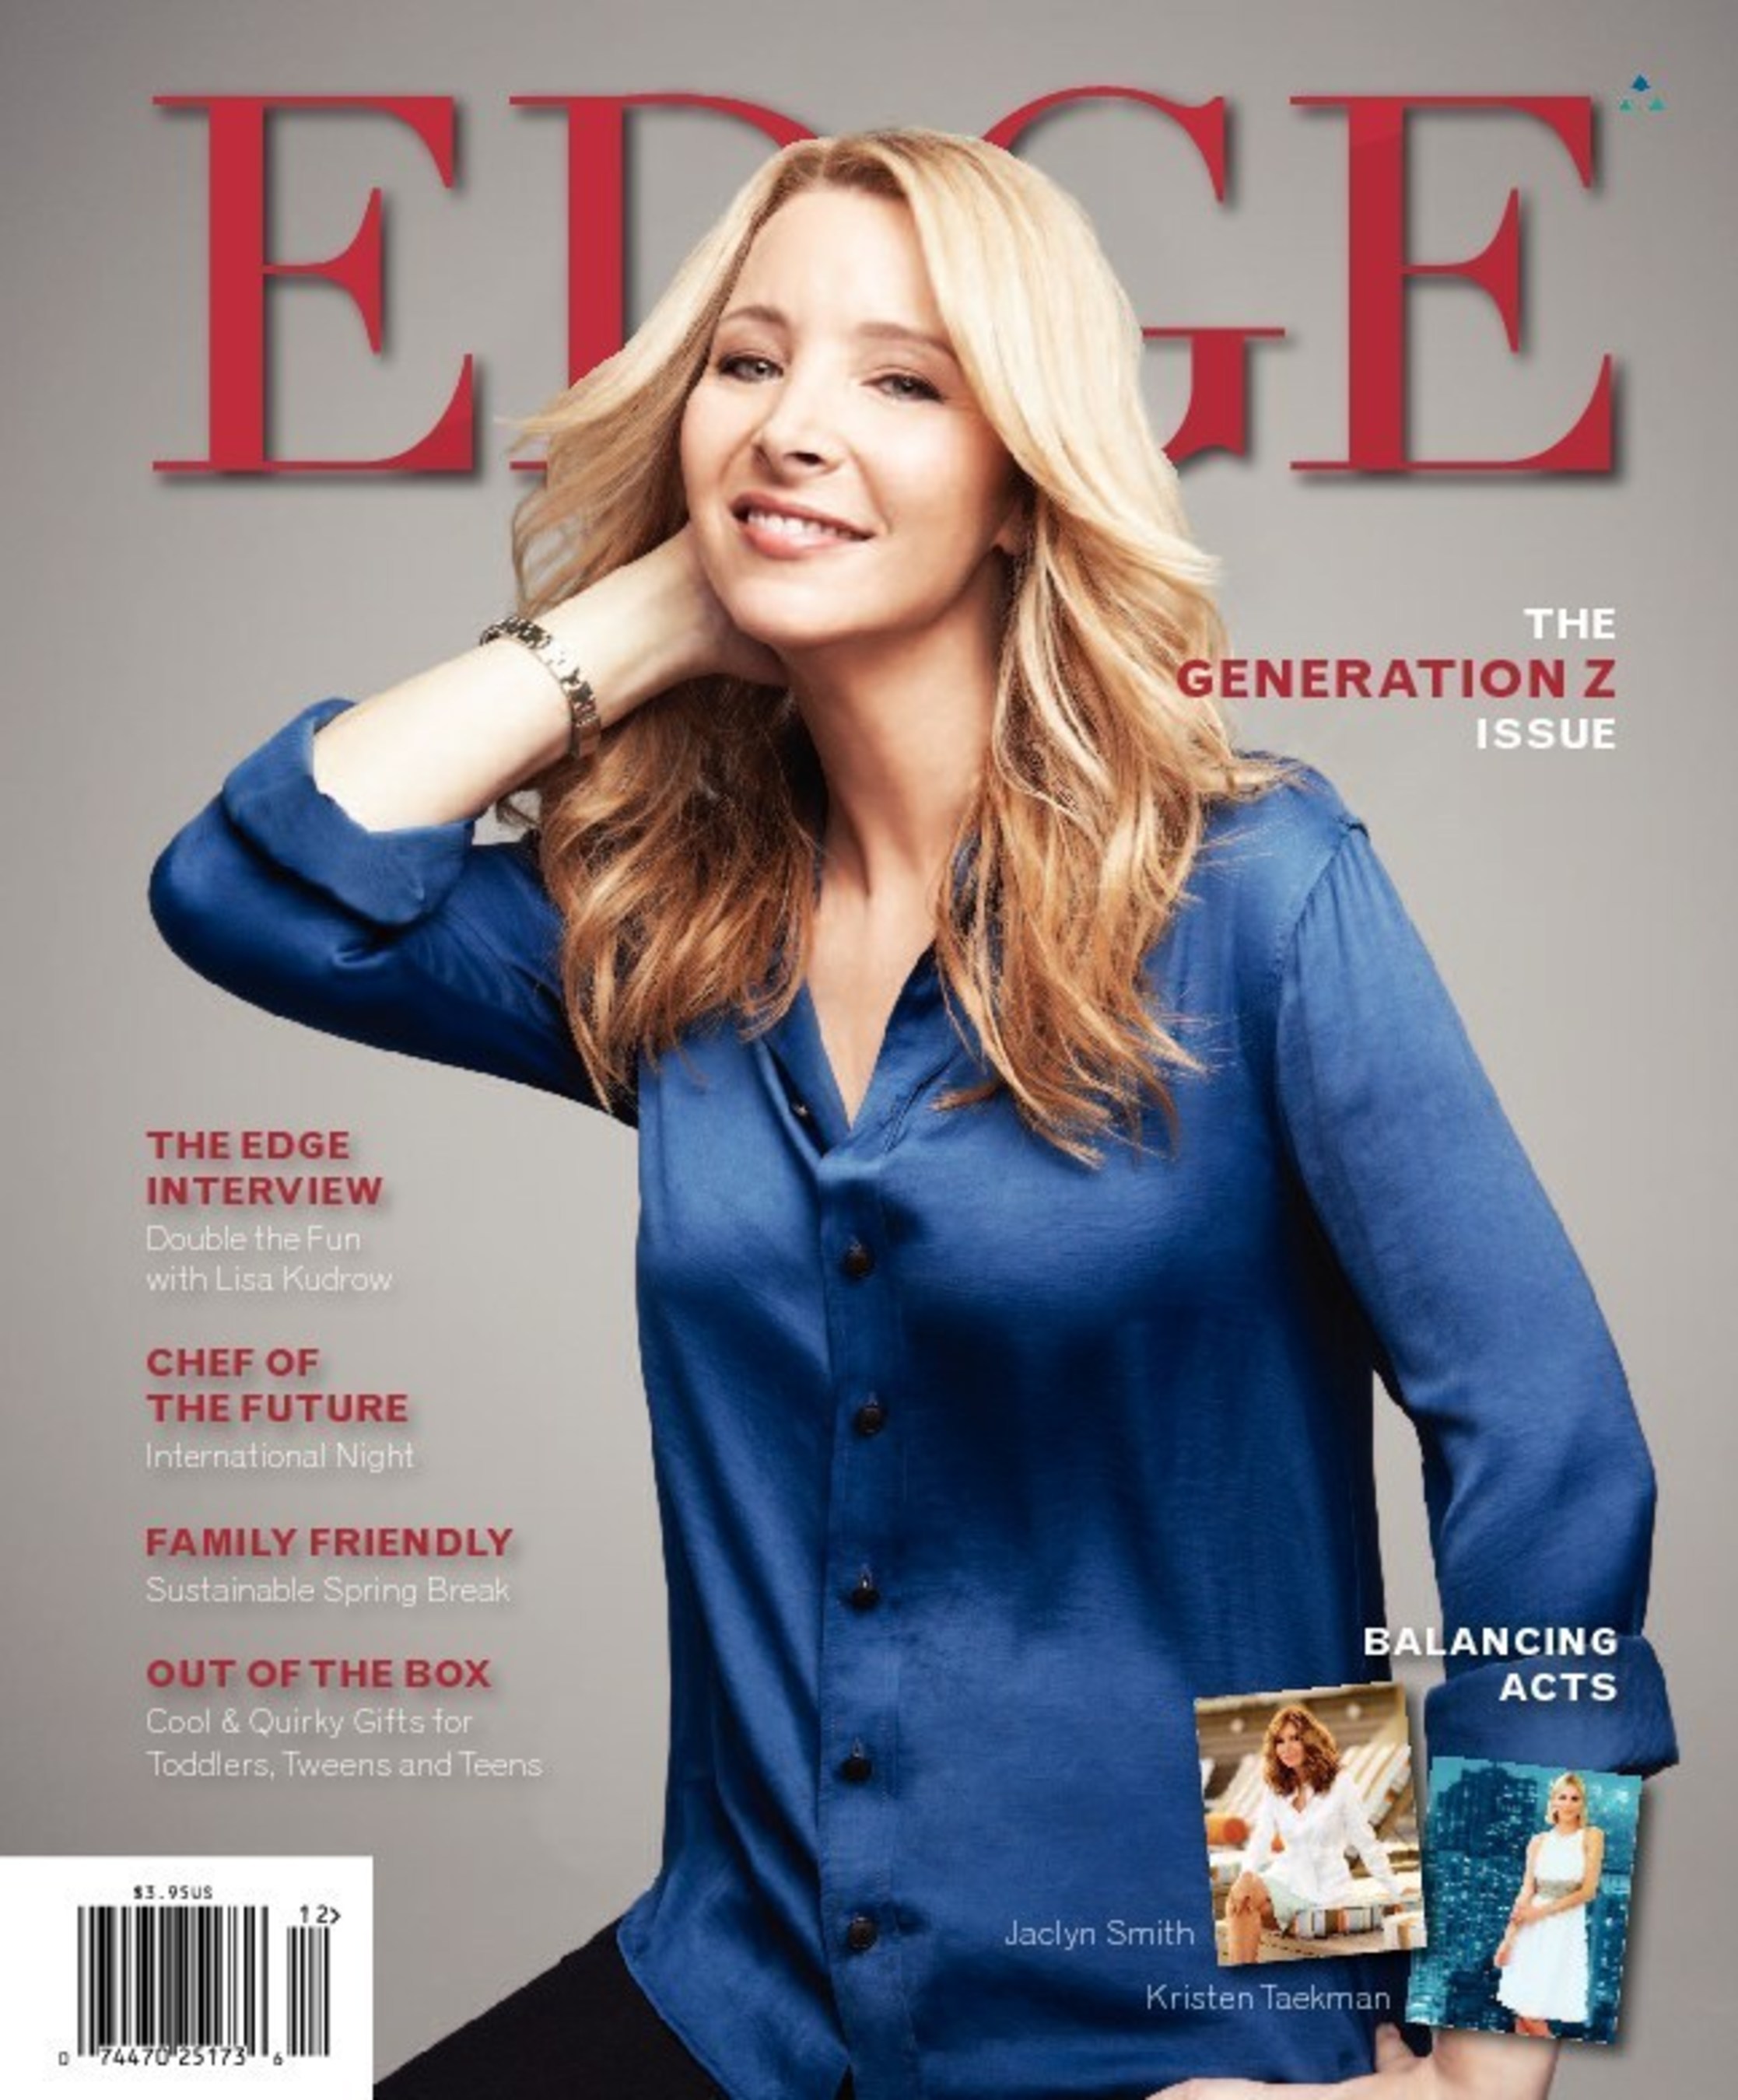 Lisa Kudrow? Funny You Should Ask! The Lisa Kudrow Q&A is part of EDGE's Nov/Dec  "Generation Z" issue, EDGE Magazine is published by Trinitas Regional Medical Center. More than 75,000 copies are sold and mailed, regularly reaching over 300,000 readers in central New Jersey. The magazine has an additional 170,000 online readers, who spend an average of 30-plus minutes on EdgeMagOnline.com-as well as thousands more following EDGE through Twitter @EDGEMagNJ and Facebook  EDGE Magazine (NJ).